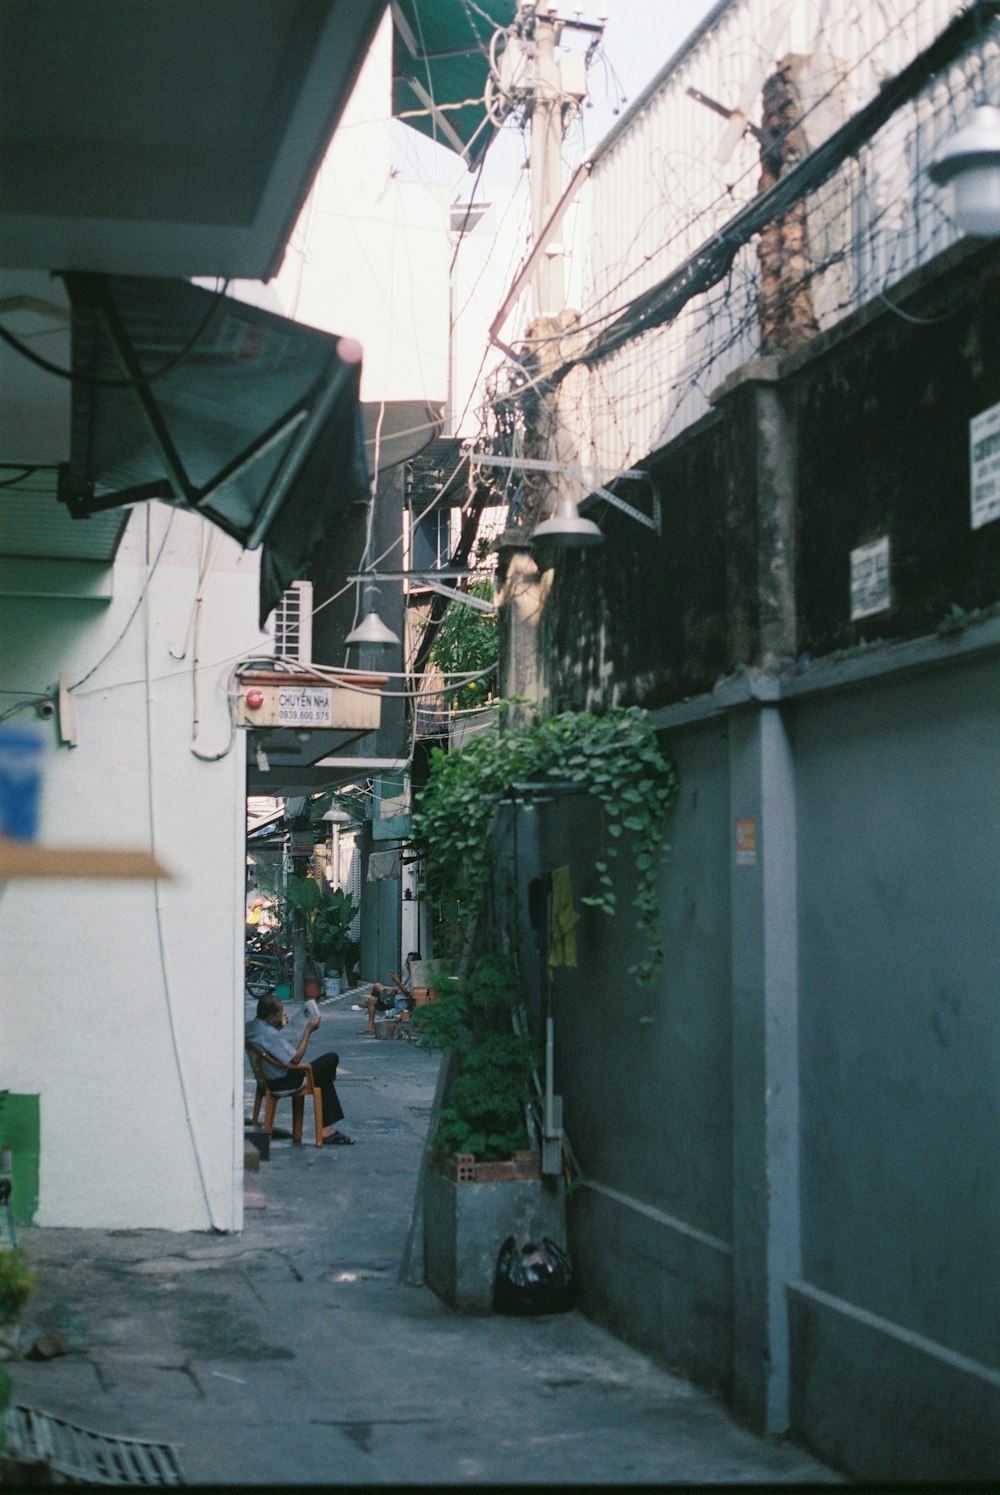 a narrow alley way with a person sitting on a bench